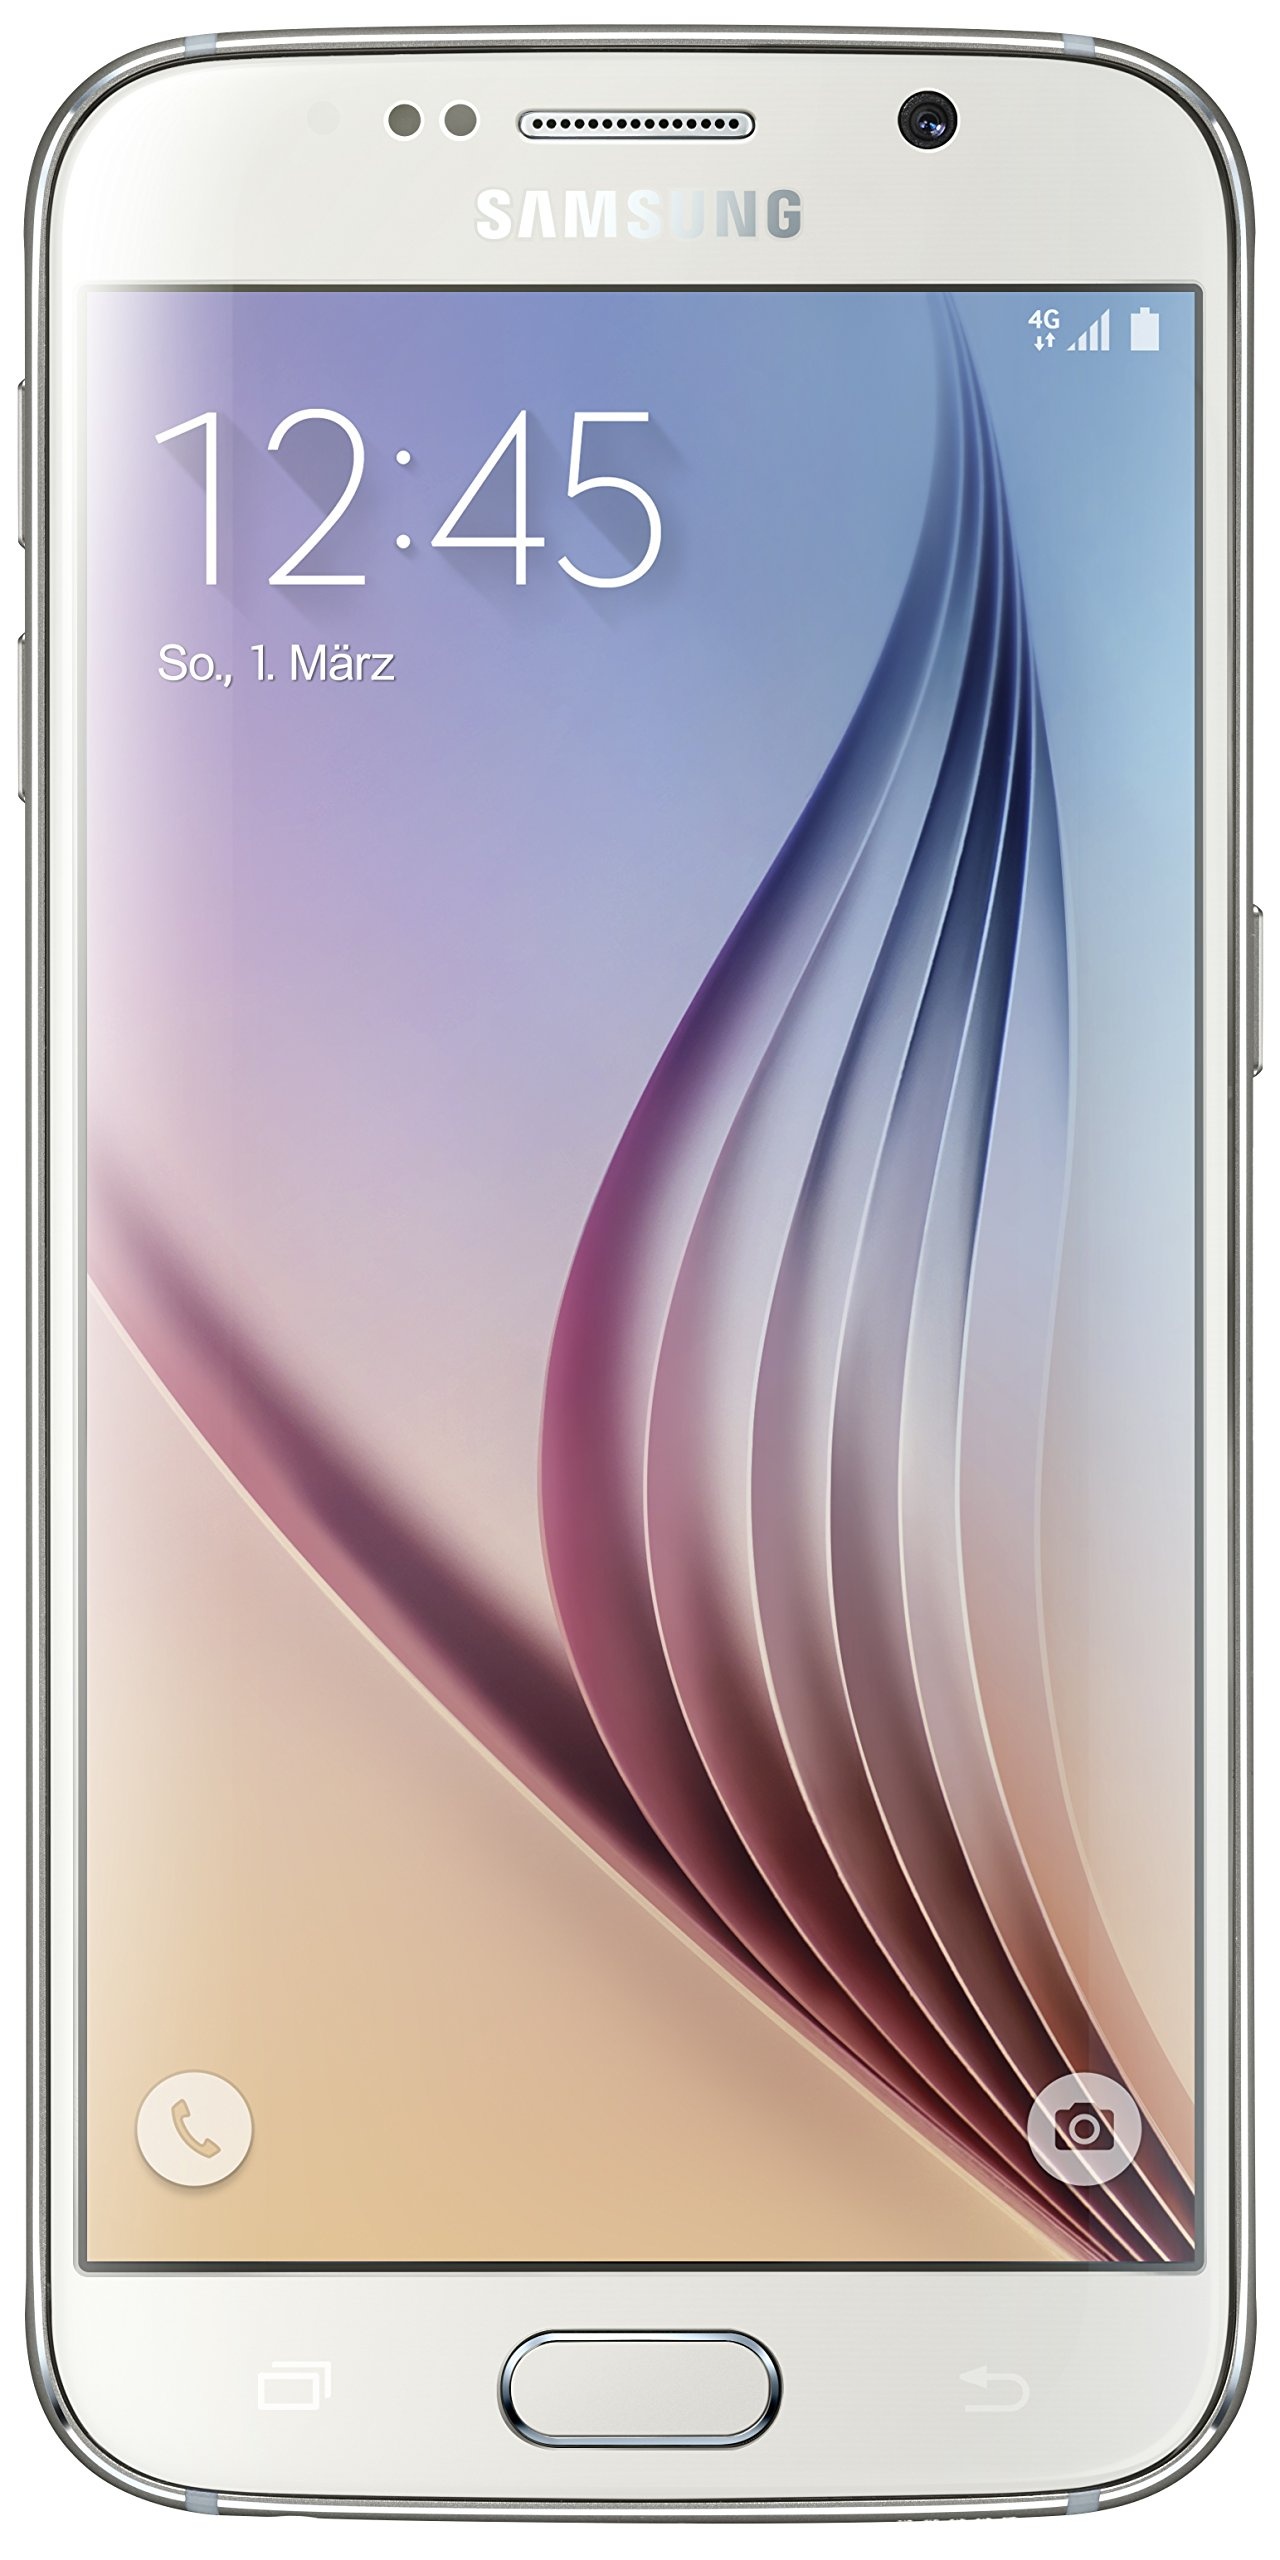 Samsung Galaxy S6 Smartphone (12,9 cm (5,1 Zoll) Touch-Display, 32GB Speicher, Android 5.0) weiß [T-Mobile Branding]